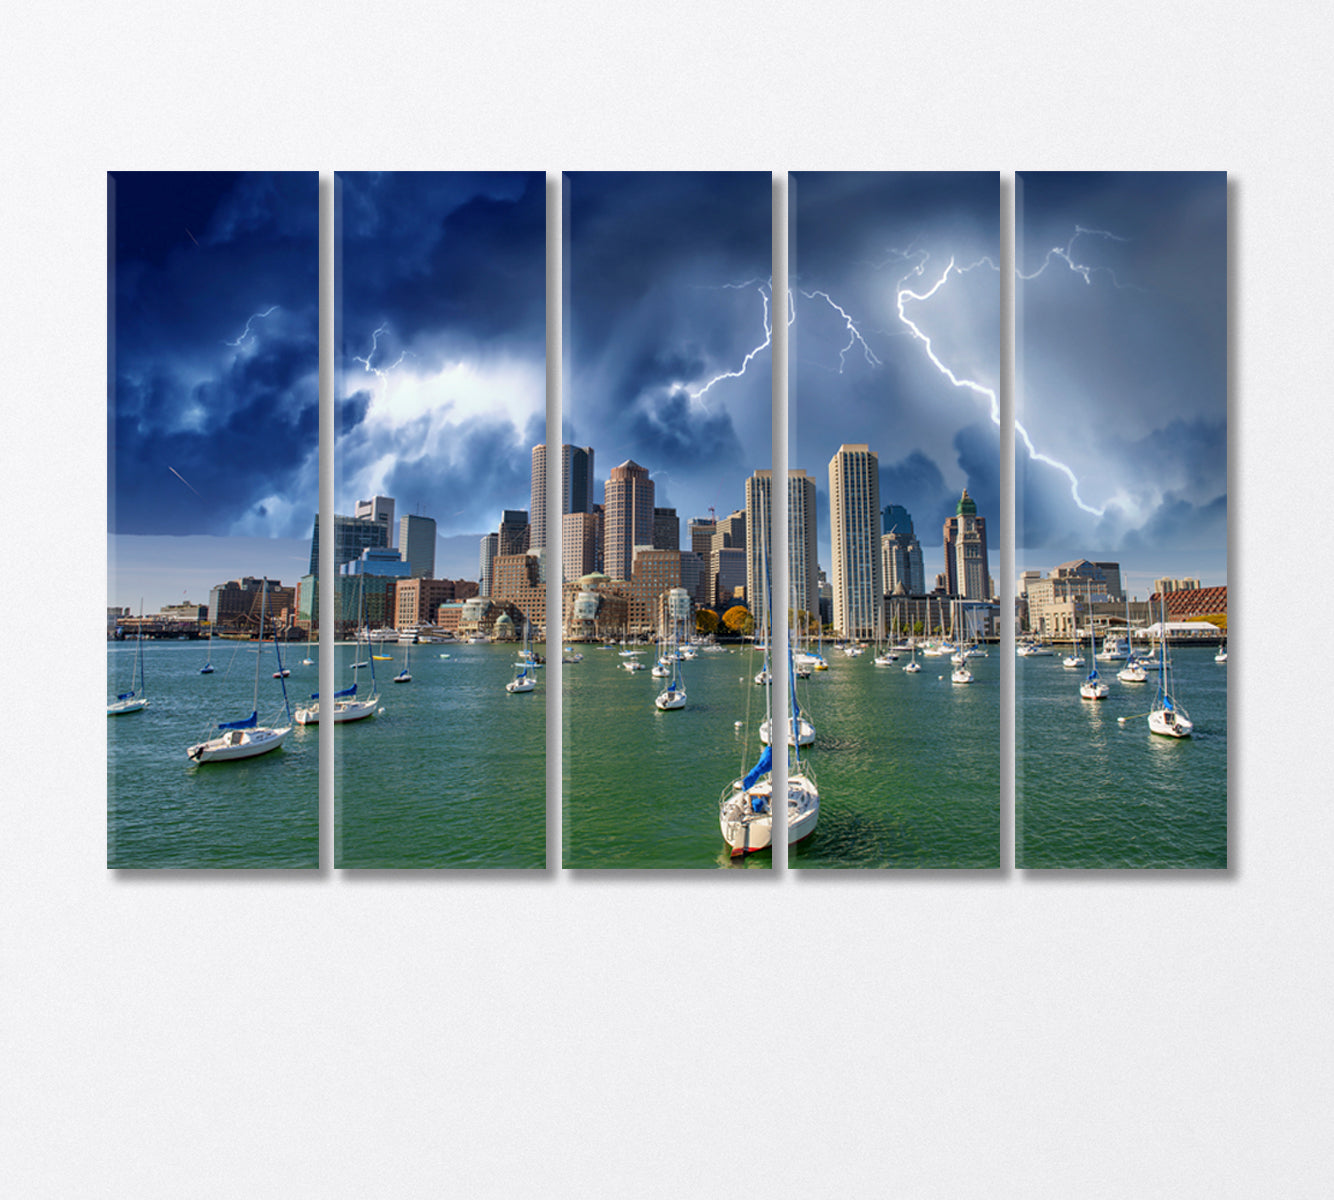 Boston Skyline and Boats Under an Impending Storm Canvas Print-Canvas Print-CetArt-5 Panels-36x24 inches-CetArt